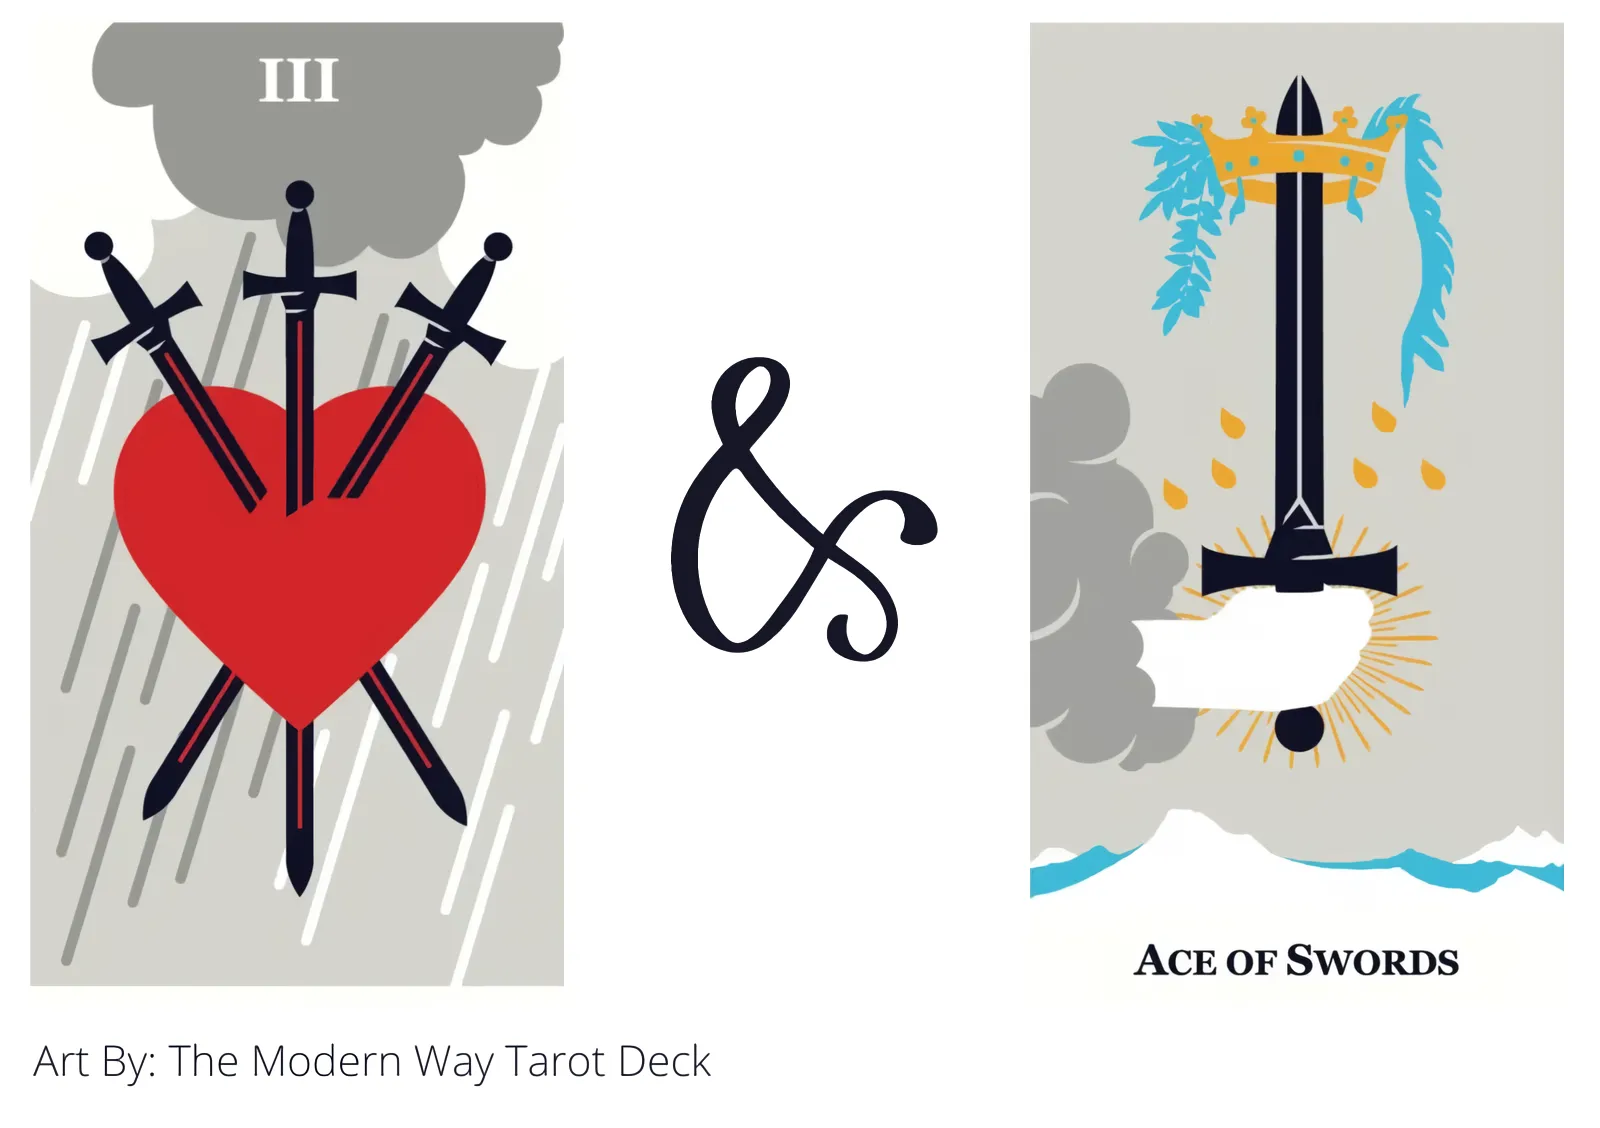 three of swords and ace of swords tarot cards together